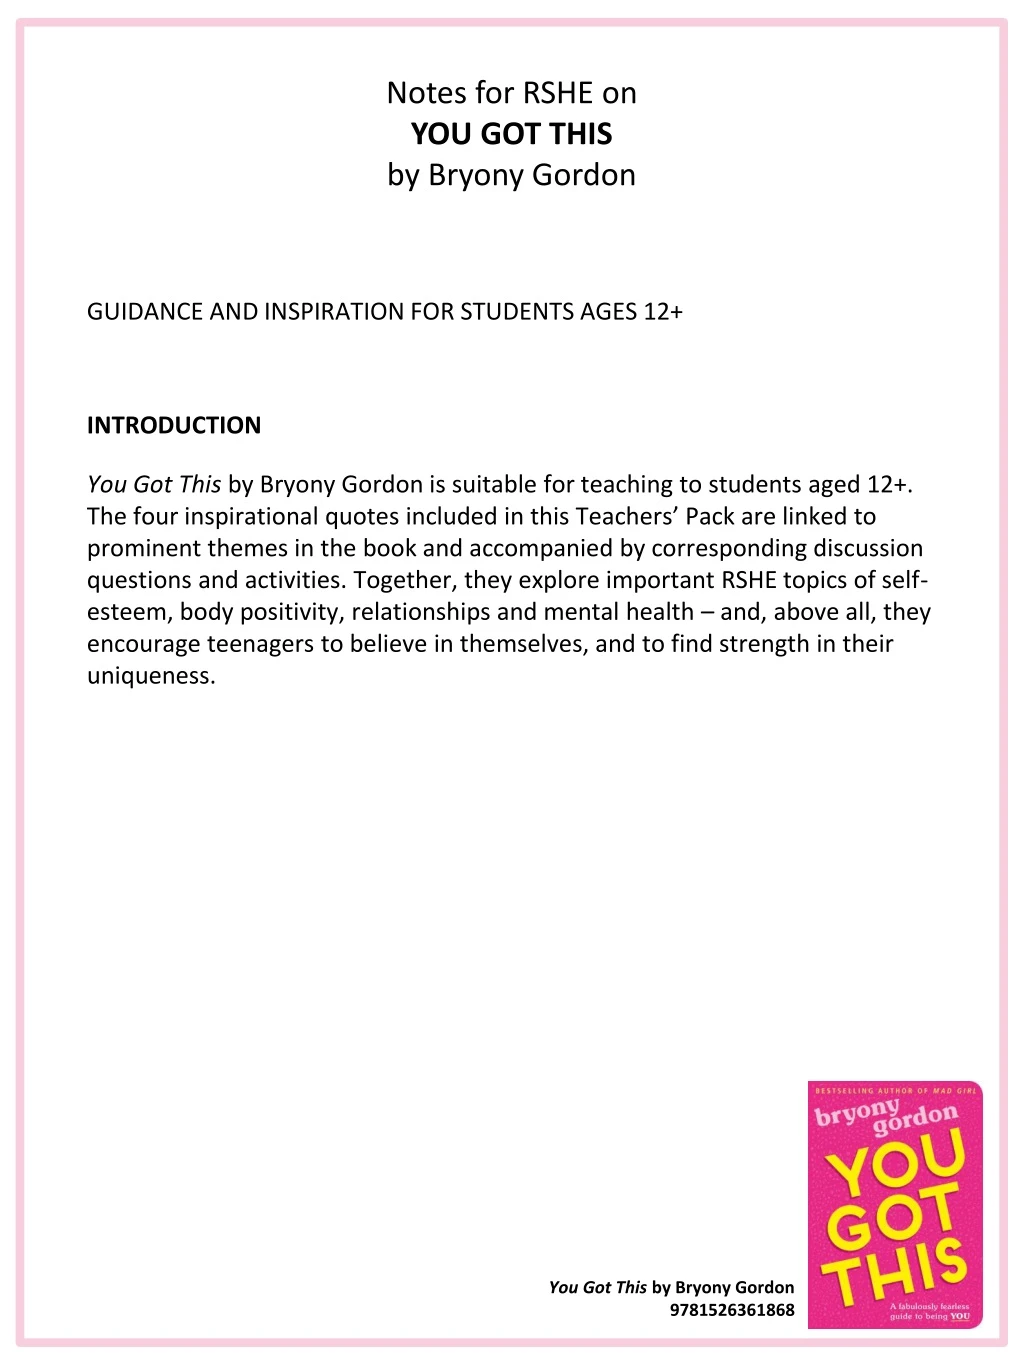 notes for rshe on you got this by bryony gordon